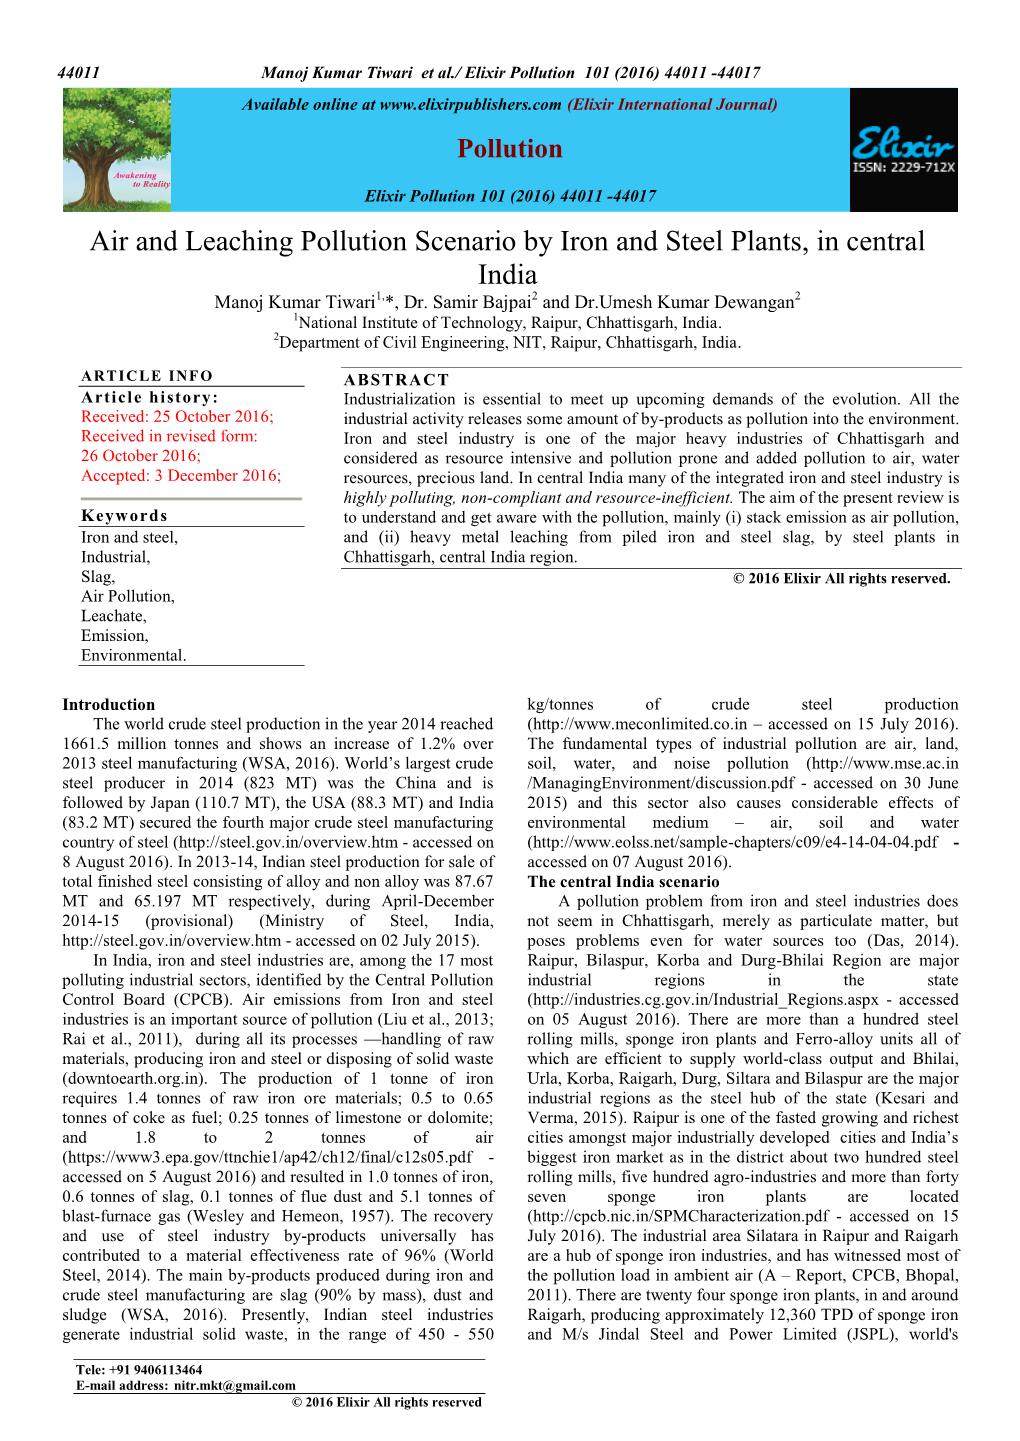 Air and Leaching Pollution Scenario by Iron and Steel Plants, in Central India Manoj Kumar Tiwari1,*, Dr